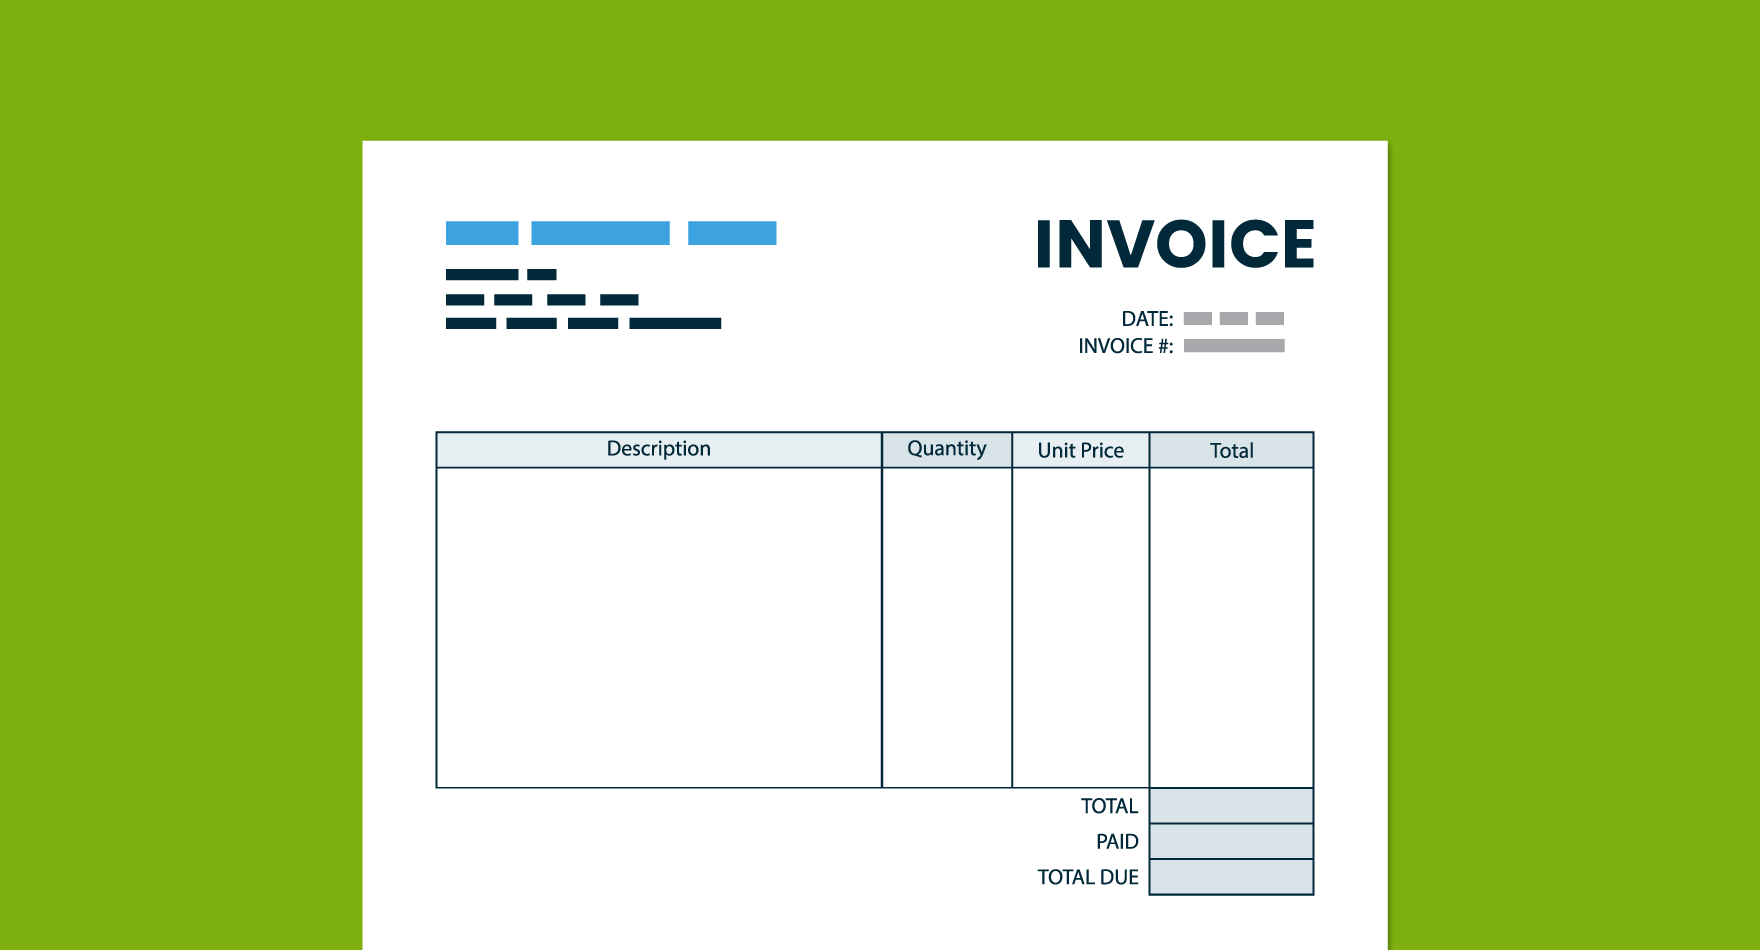 Invoicing - Effective Immediately